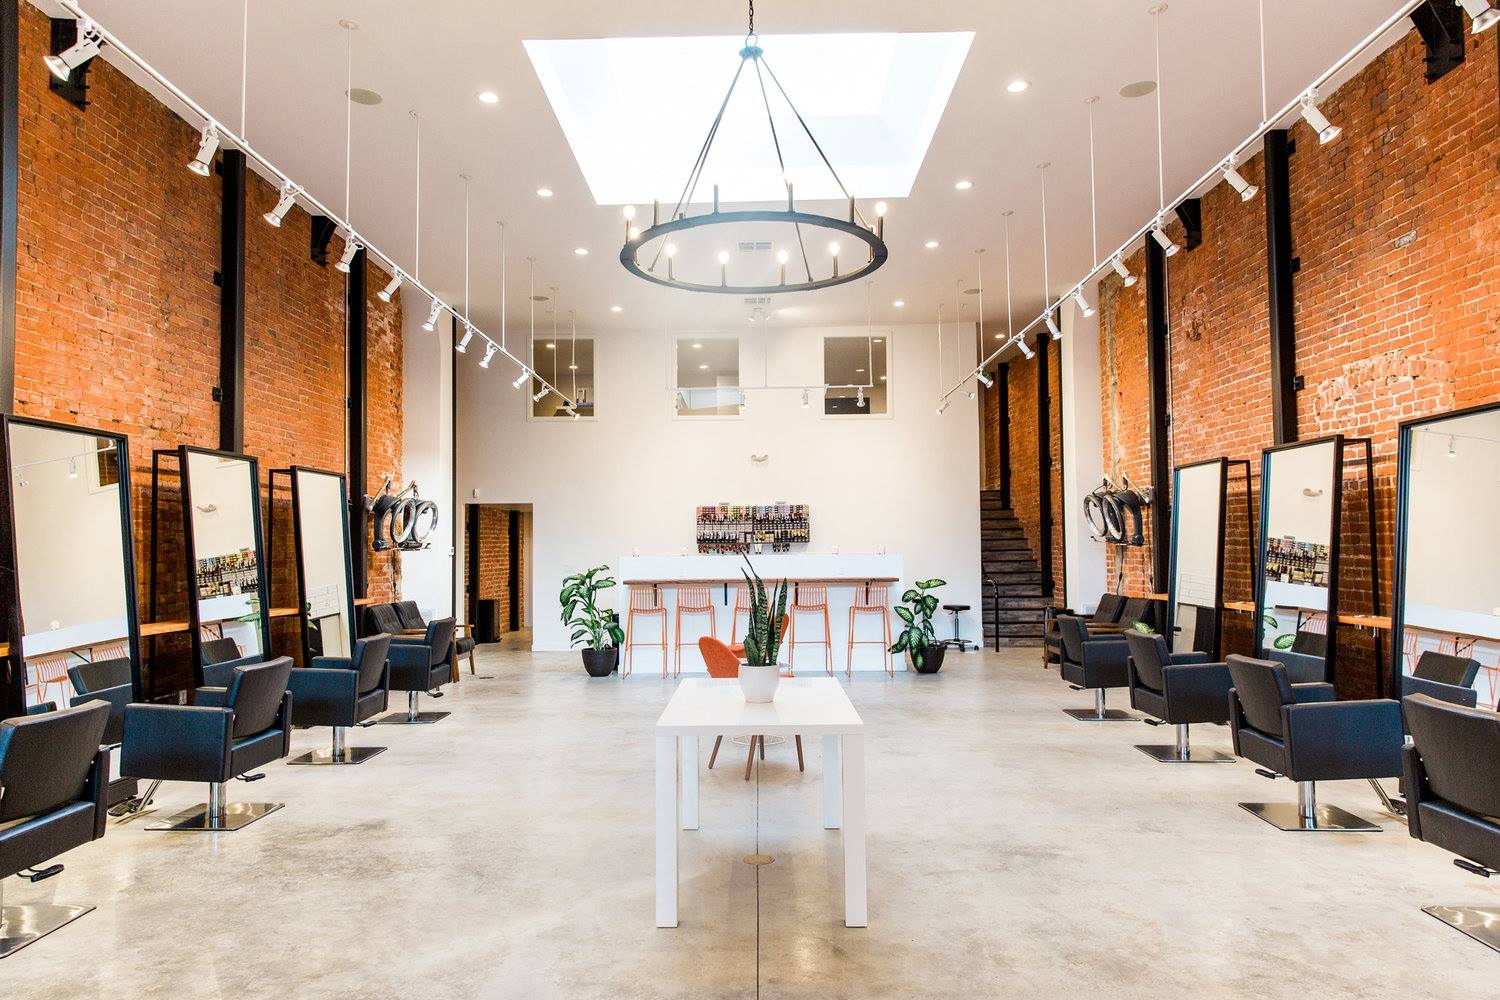 Everything You Need to Open Your Own Salon